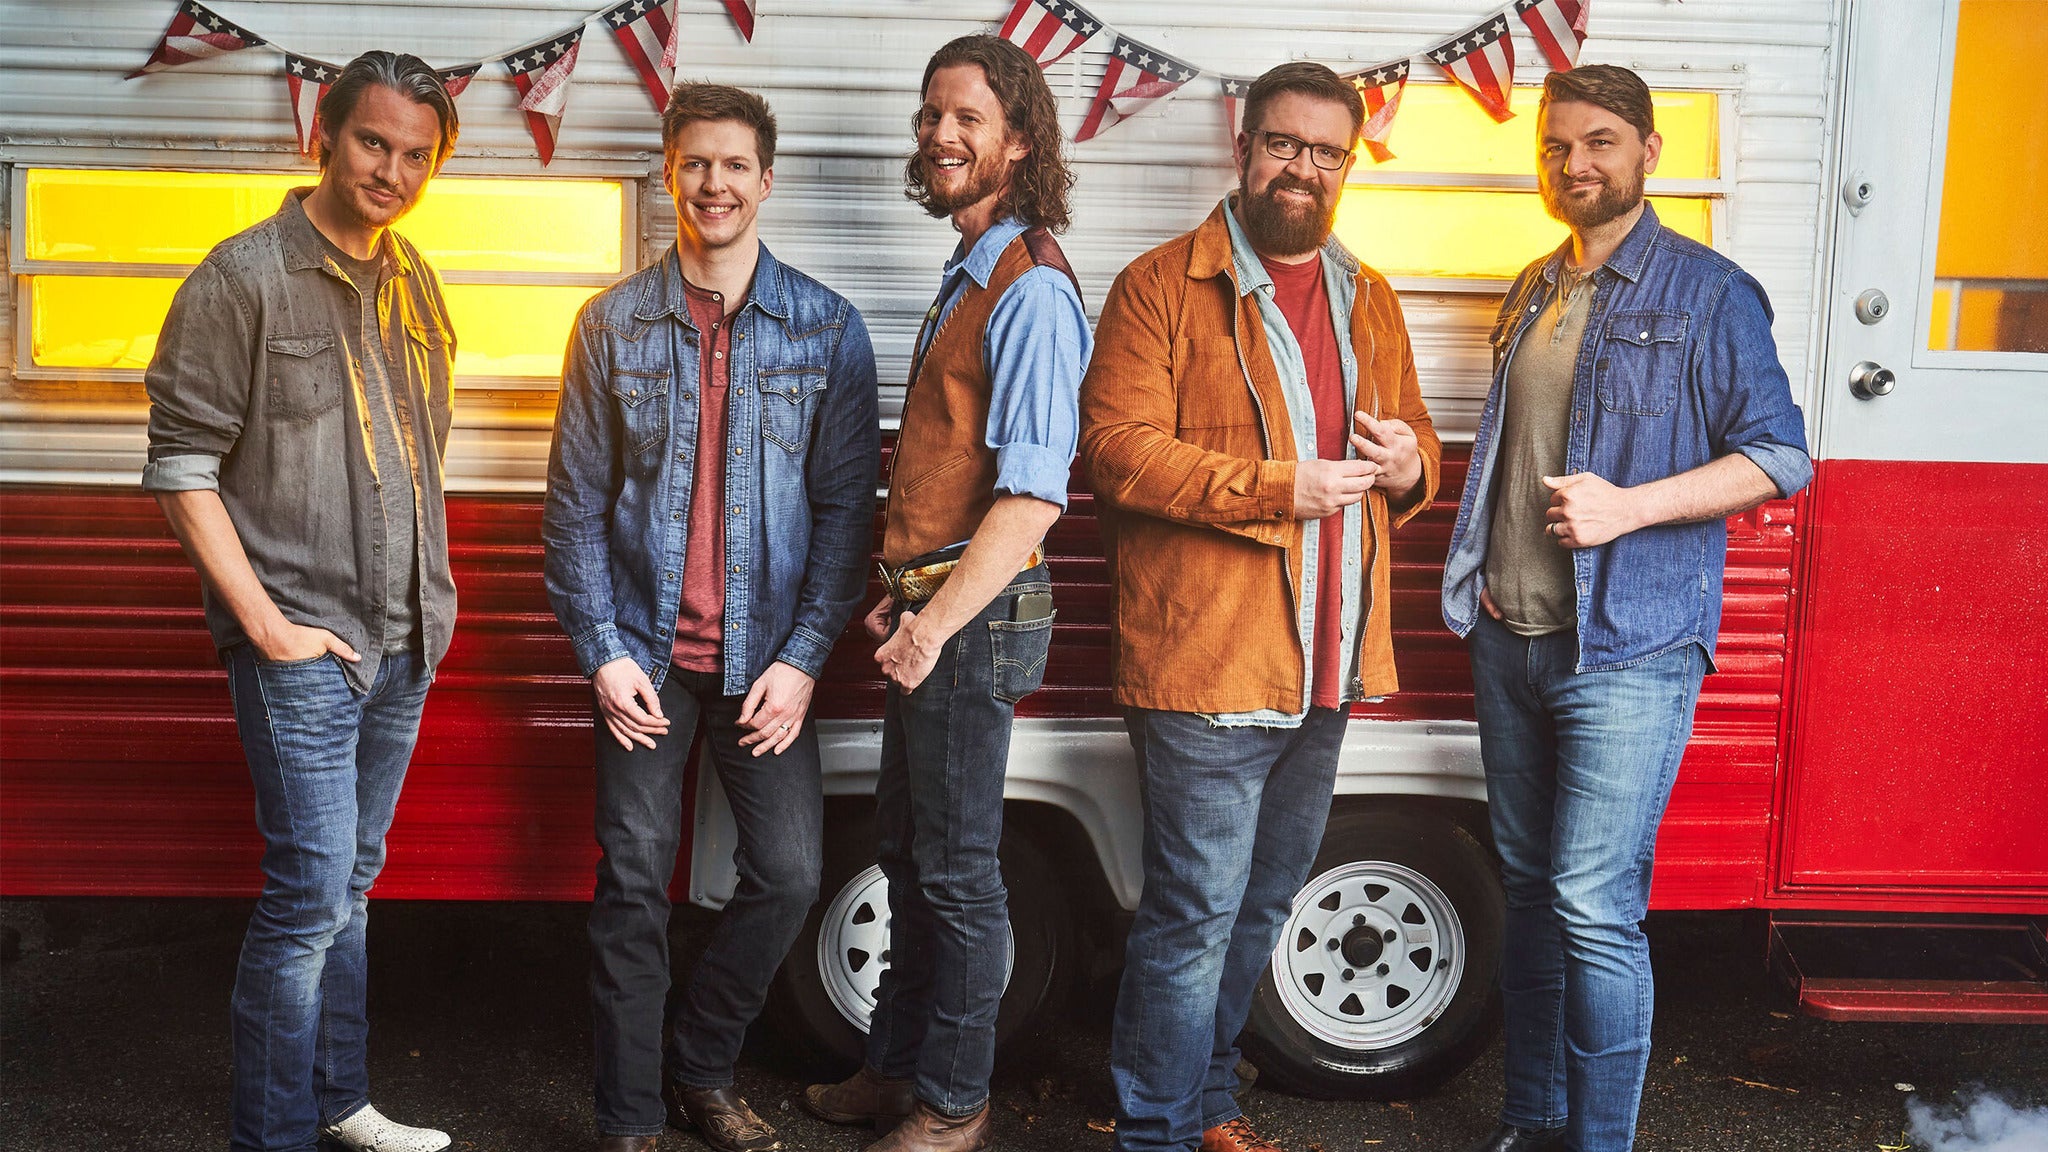 Home Free: Road Sweet Road Tour presale code for event tickets in Tulsa, OK (Cox Business Convention Center Legacy Hall)